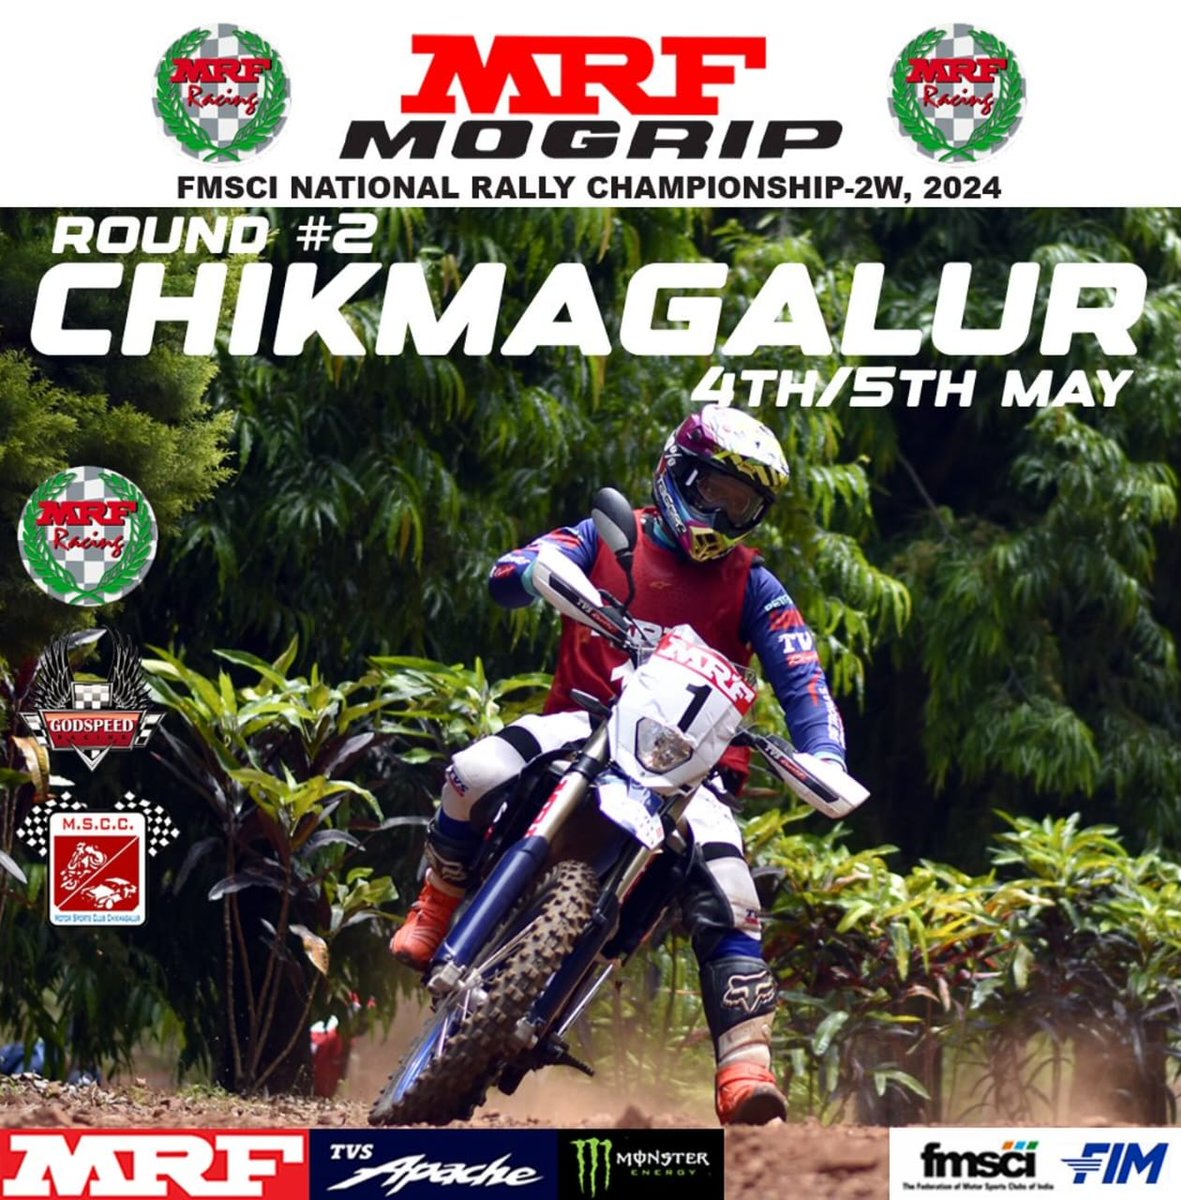 *MRF Mogrip FMSCI Indian National Rally Championship 2024* Round 2 - Rally of Chikmagalur Stage Starts at 0723hrs on 05th May'24. Live Results : Link👇 mrfinrc2w.zeitlive.com